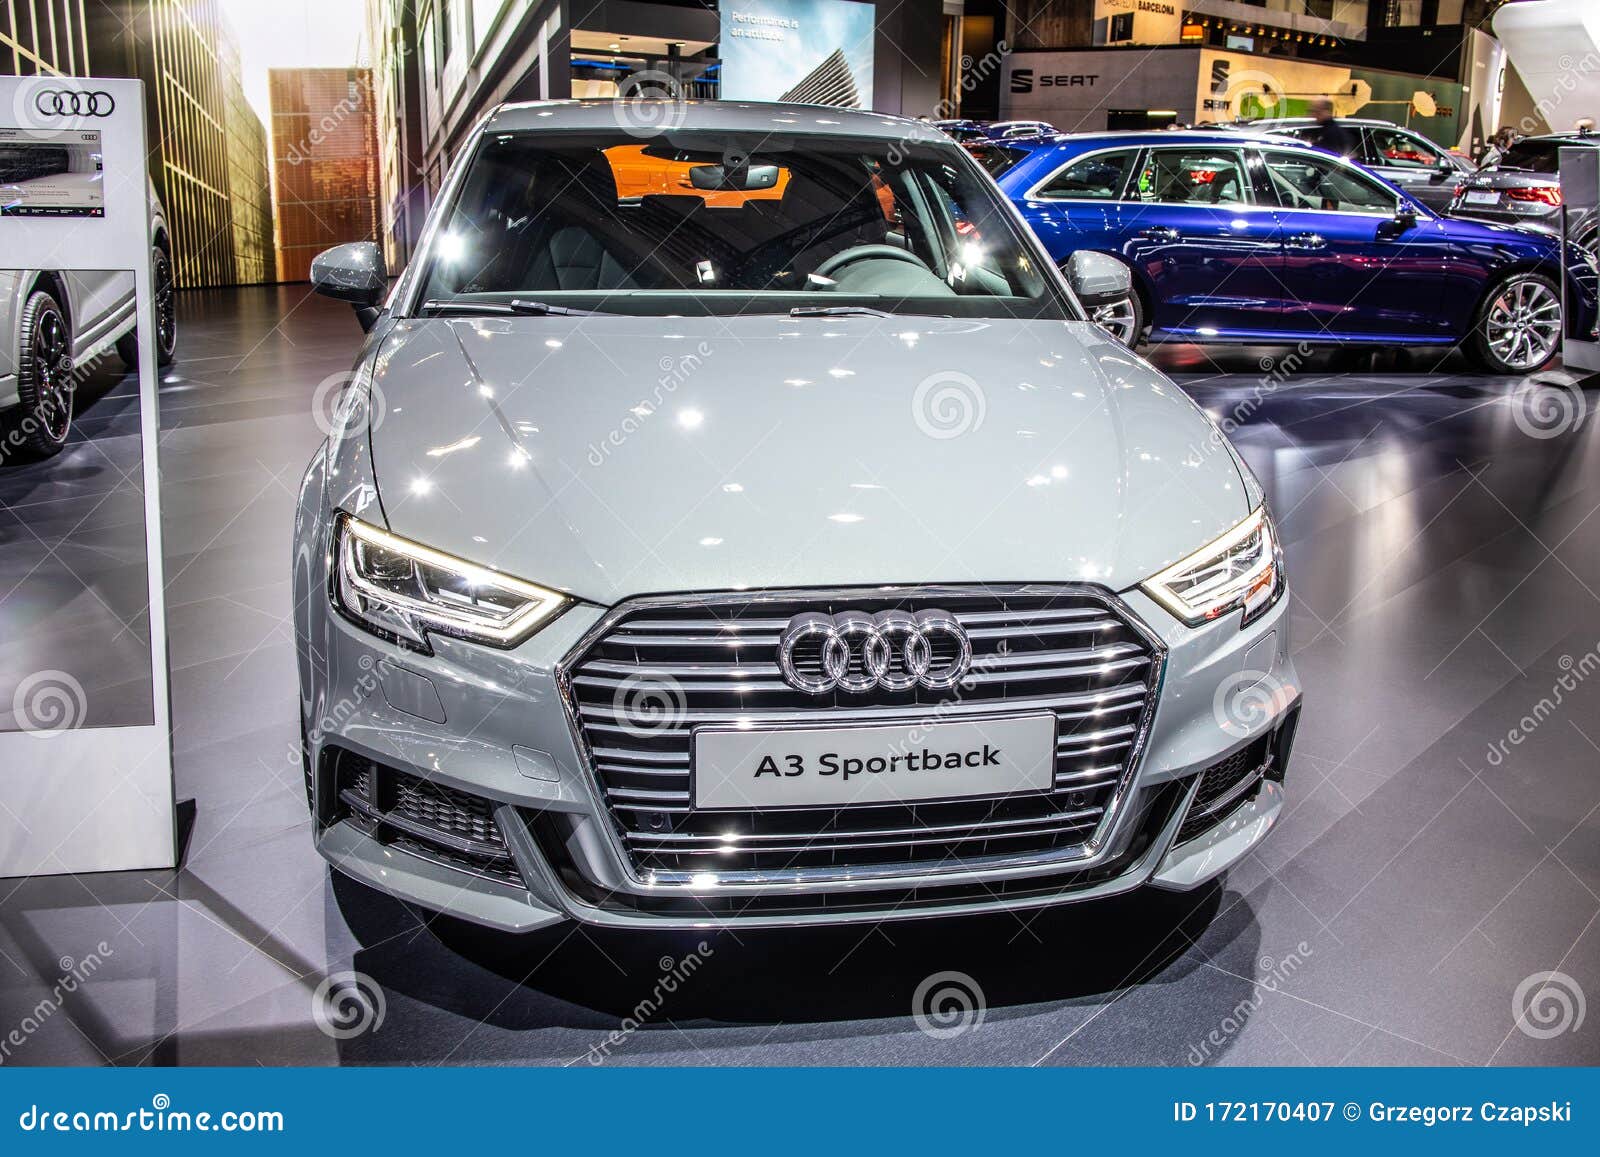 Audi A3 Sportback 30 TFSI Brussels Motor Show, Third Generation, Typ 8V, Produced by Audi AG Editorial Photography - Image of autoshow,